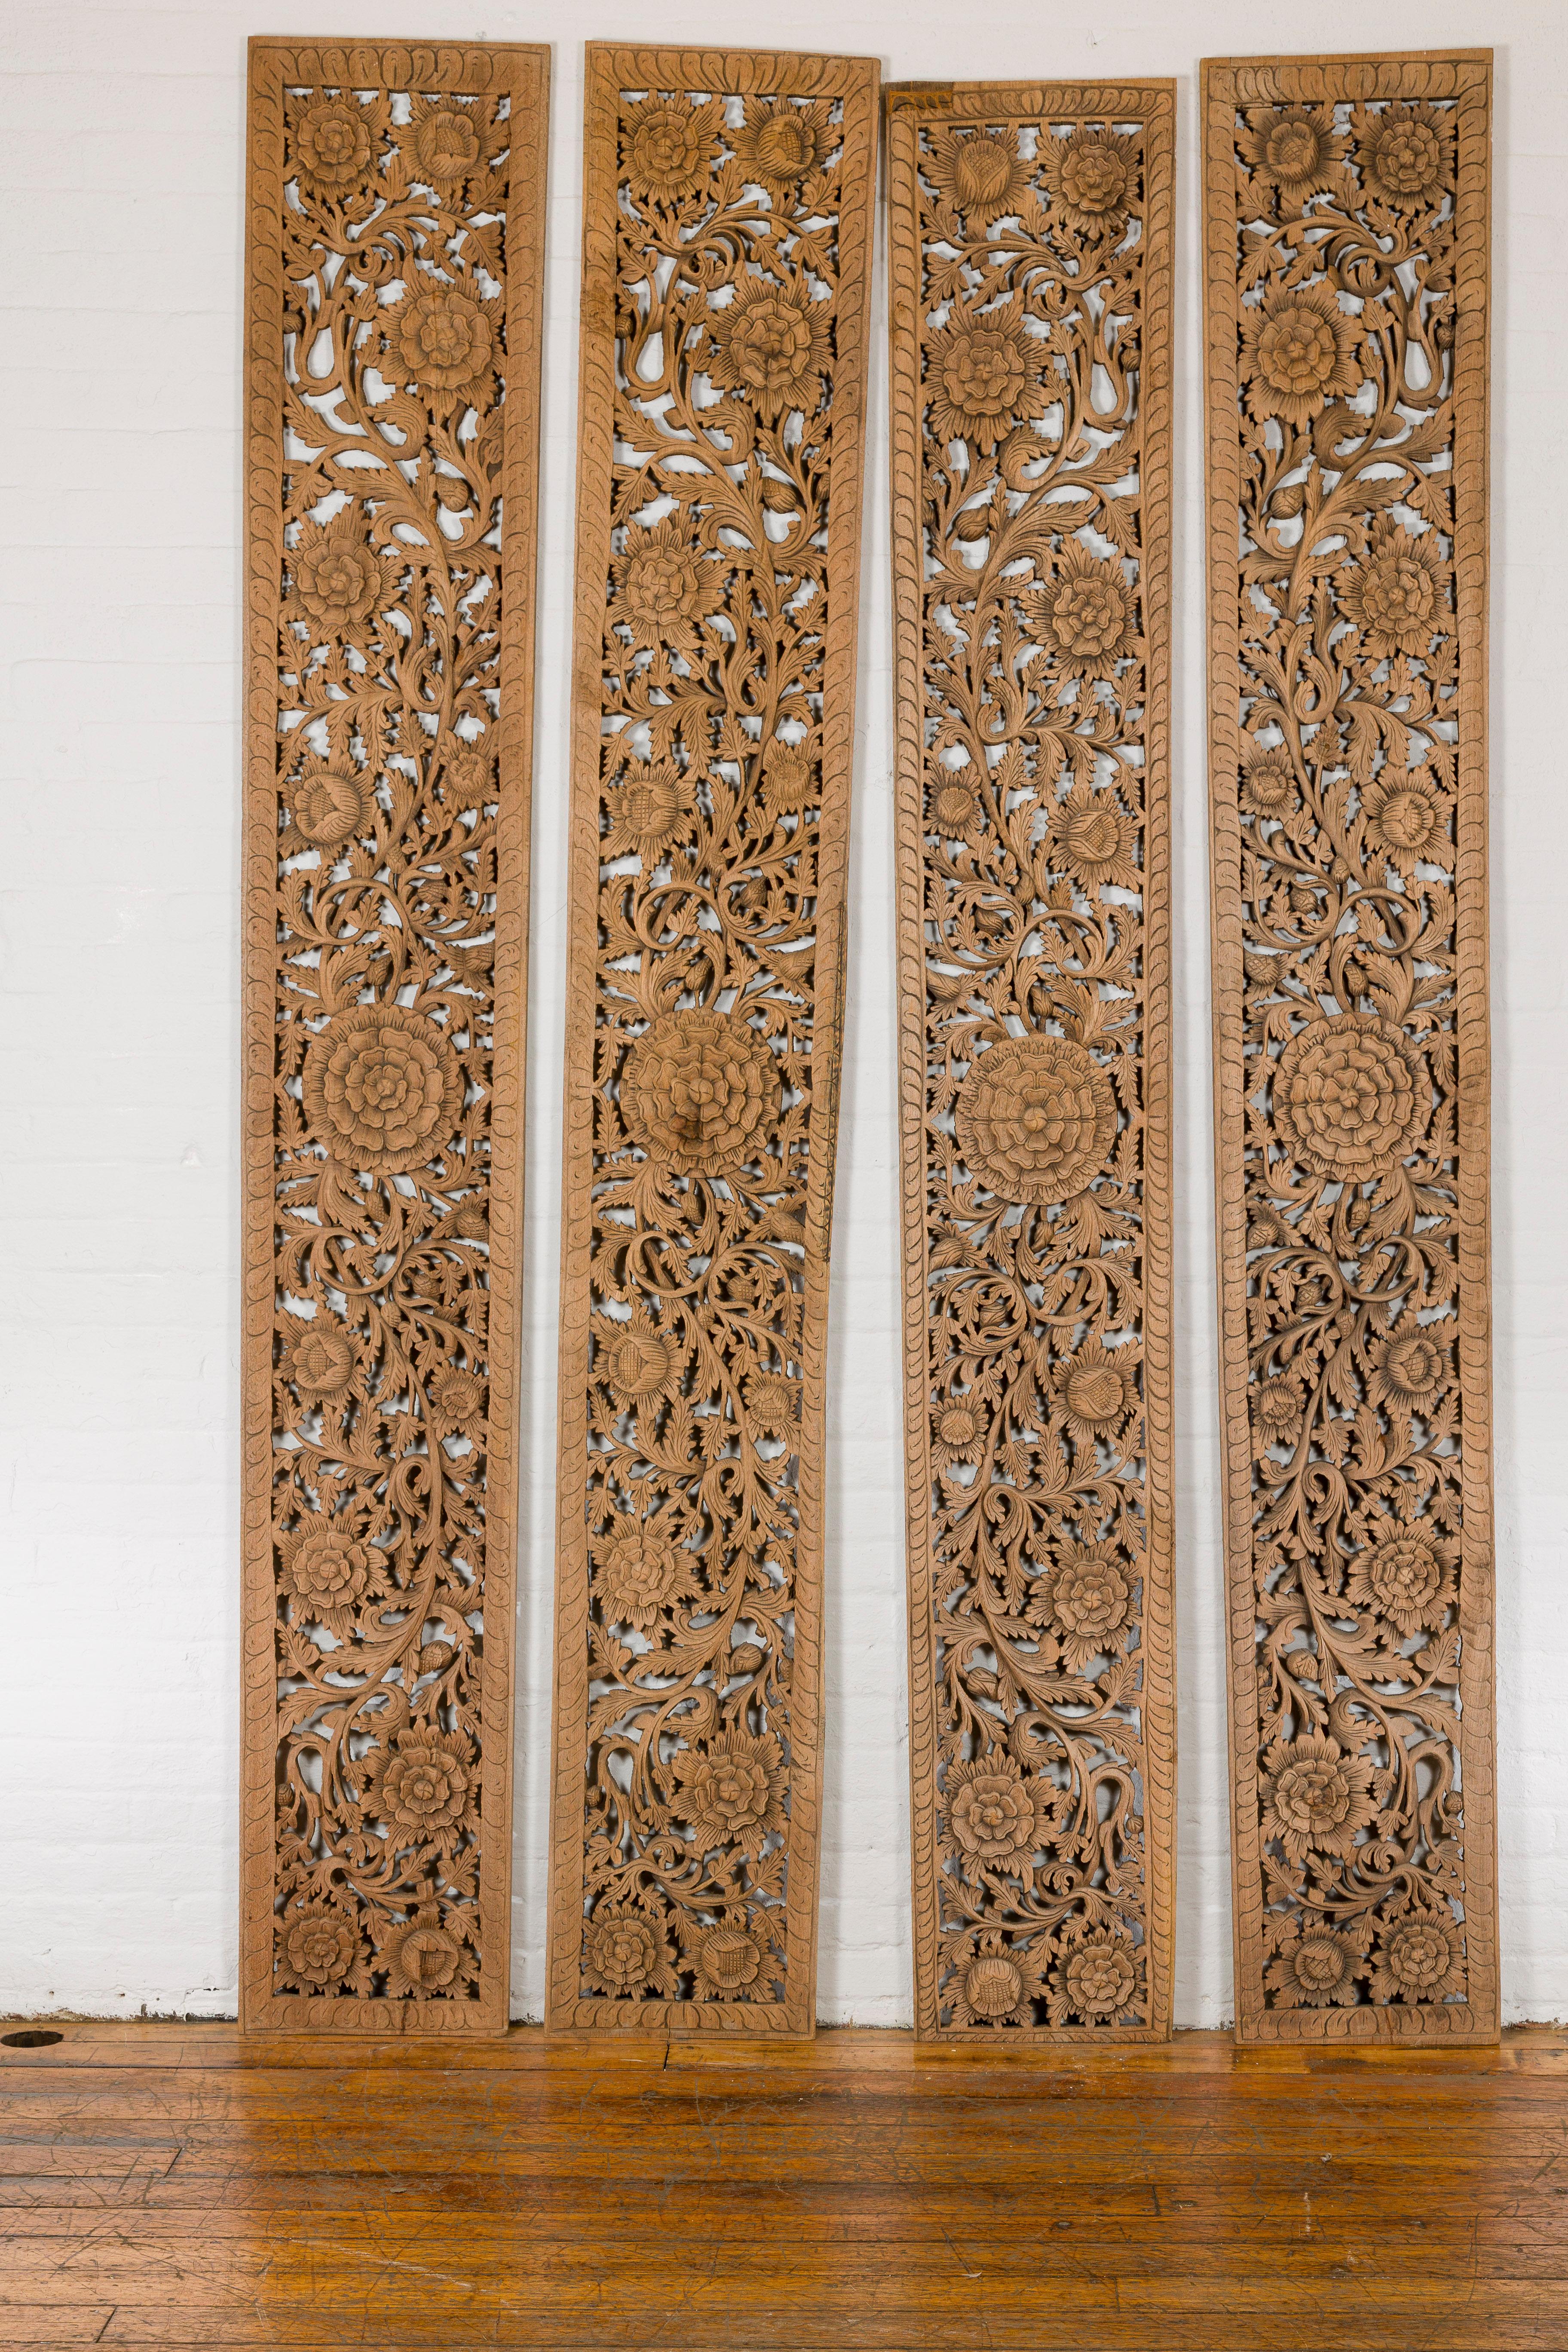 A set of four carved wooden architectural panels from the mid 20th century with large flowers and scrolling foliage. Delve into the artistic intricacy of this set of four carved wooden architectural panels from the mid 20th century, each piece a